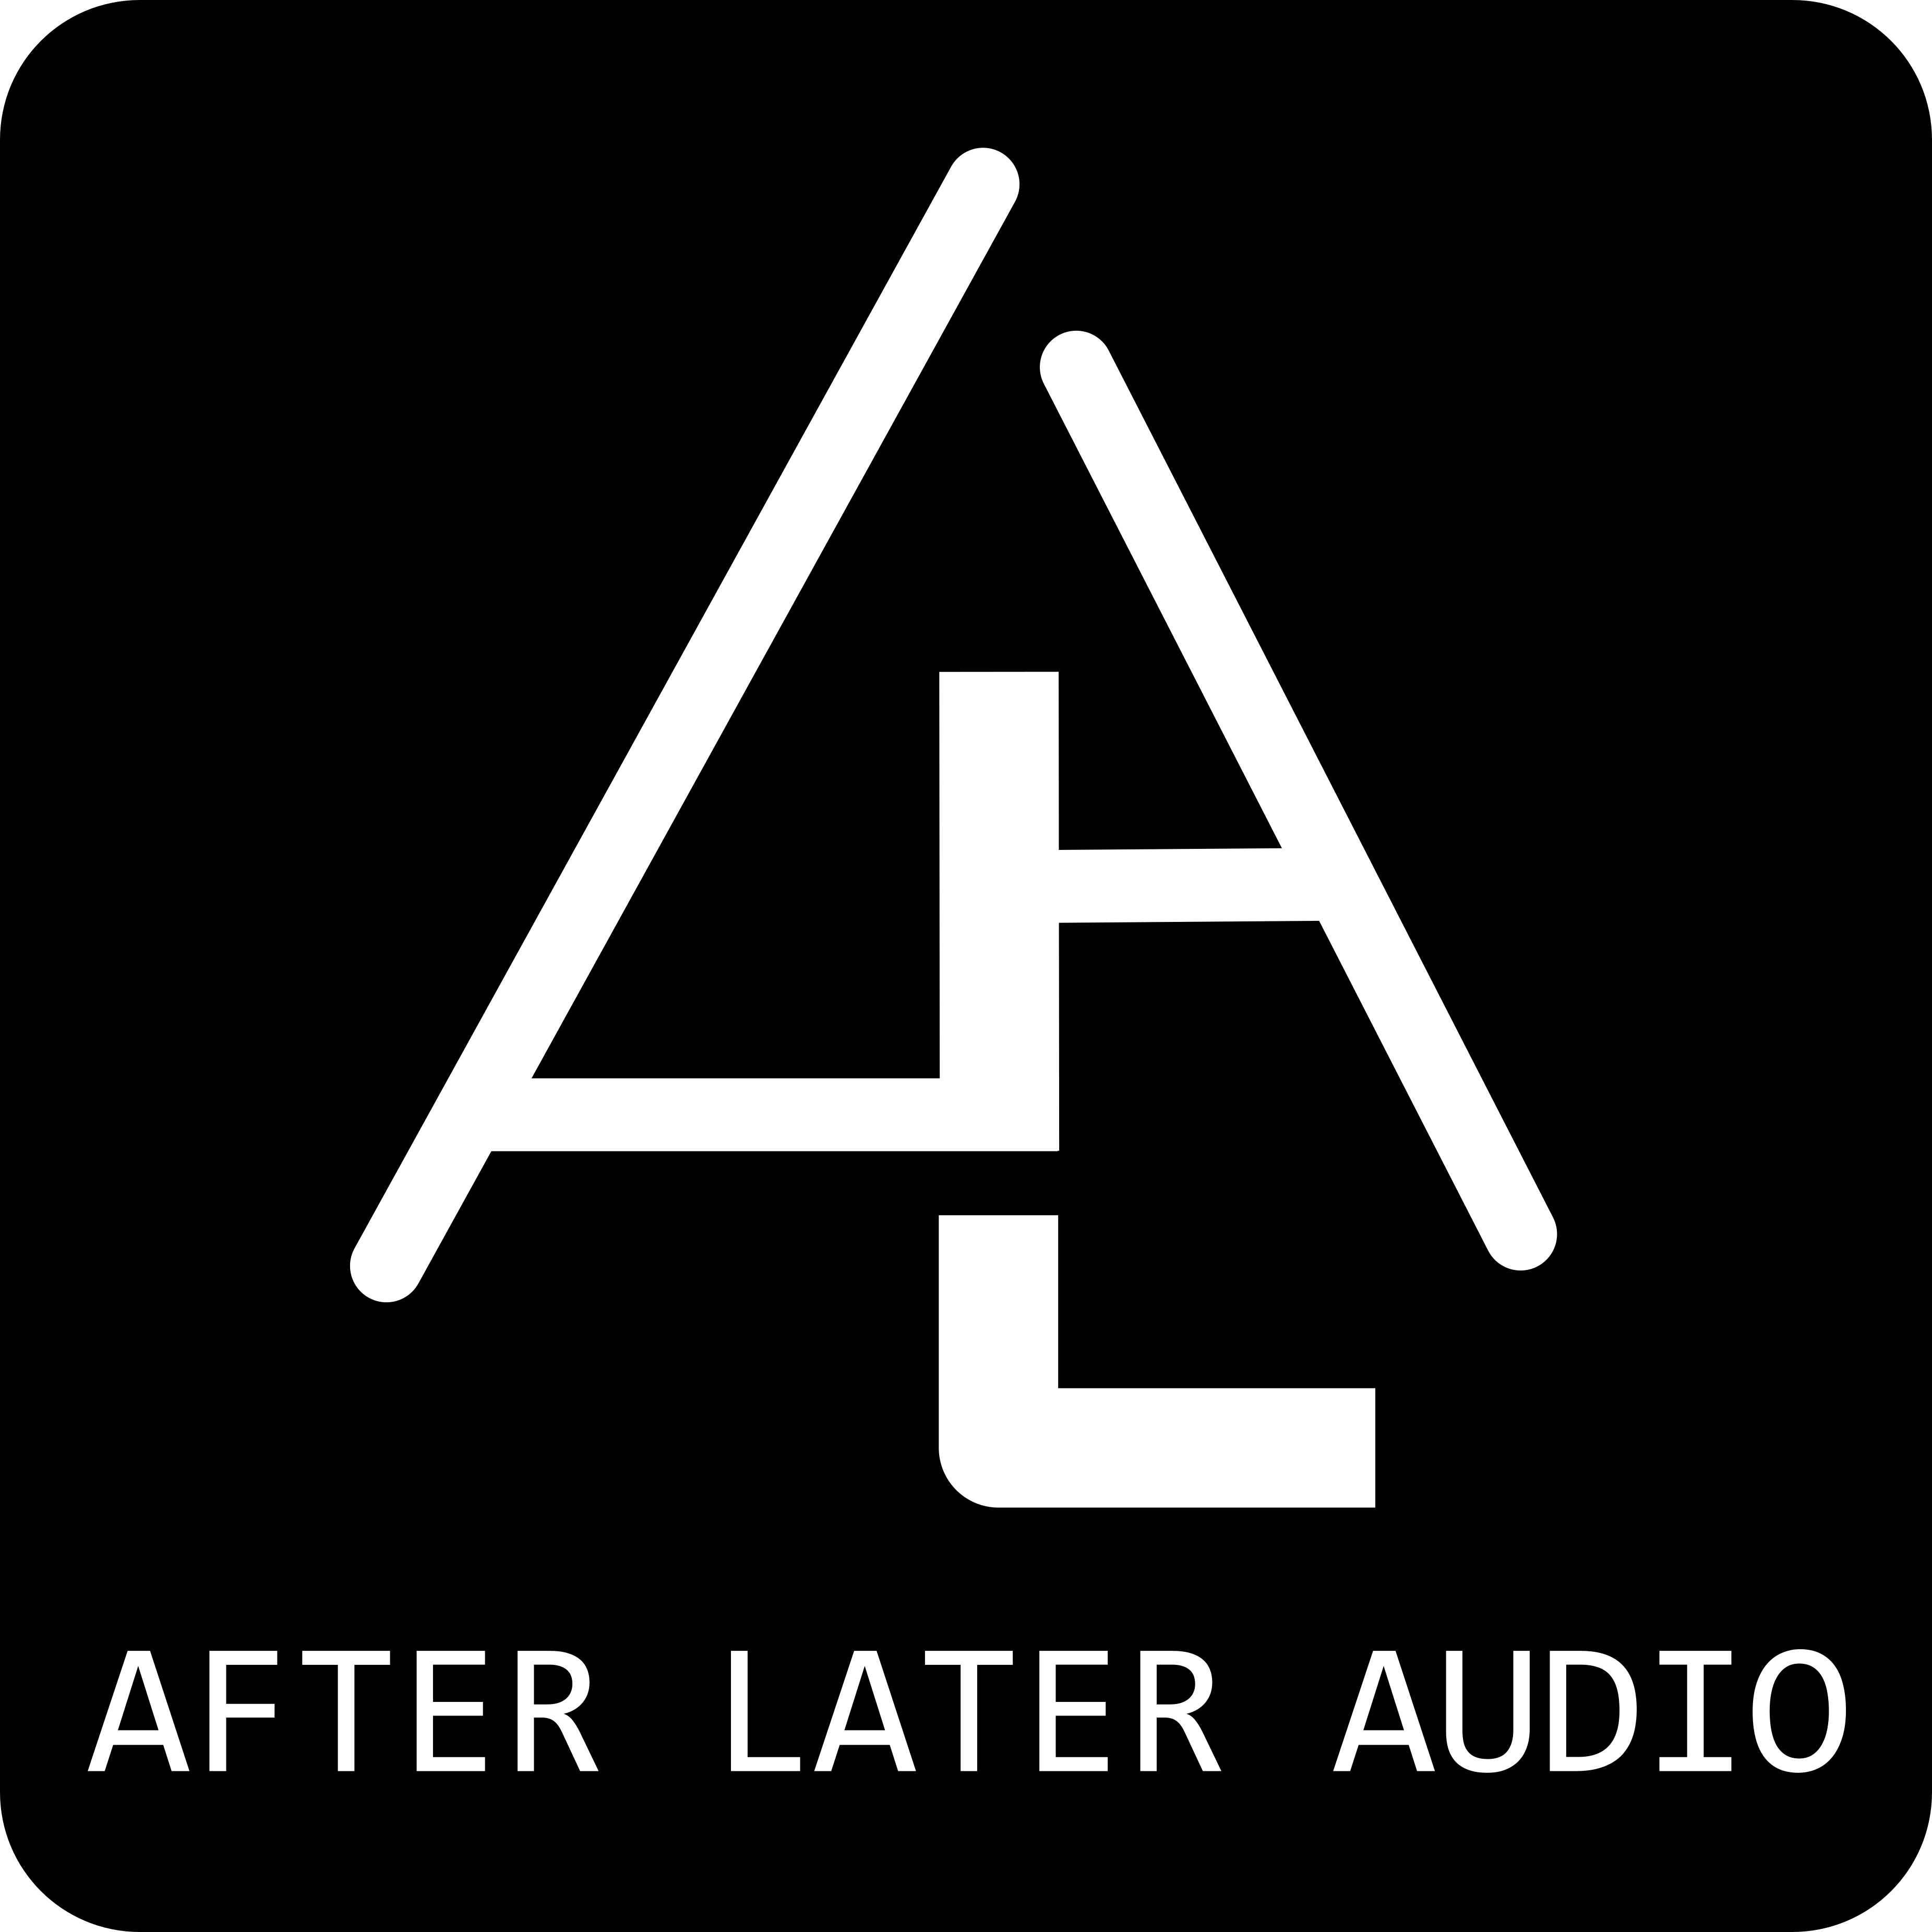 New Release – After Later Audio